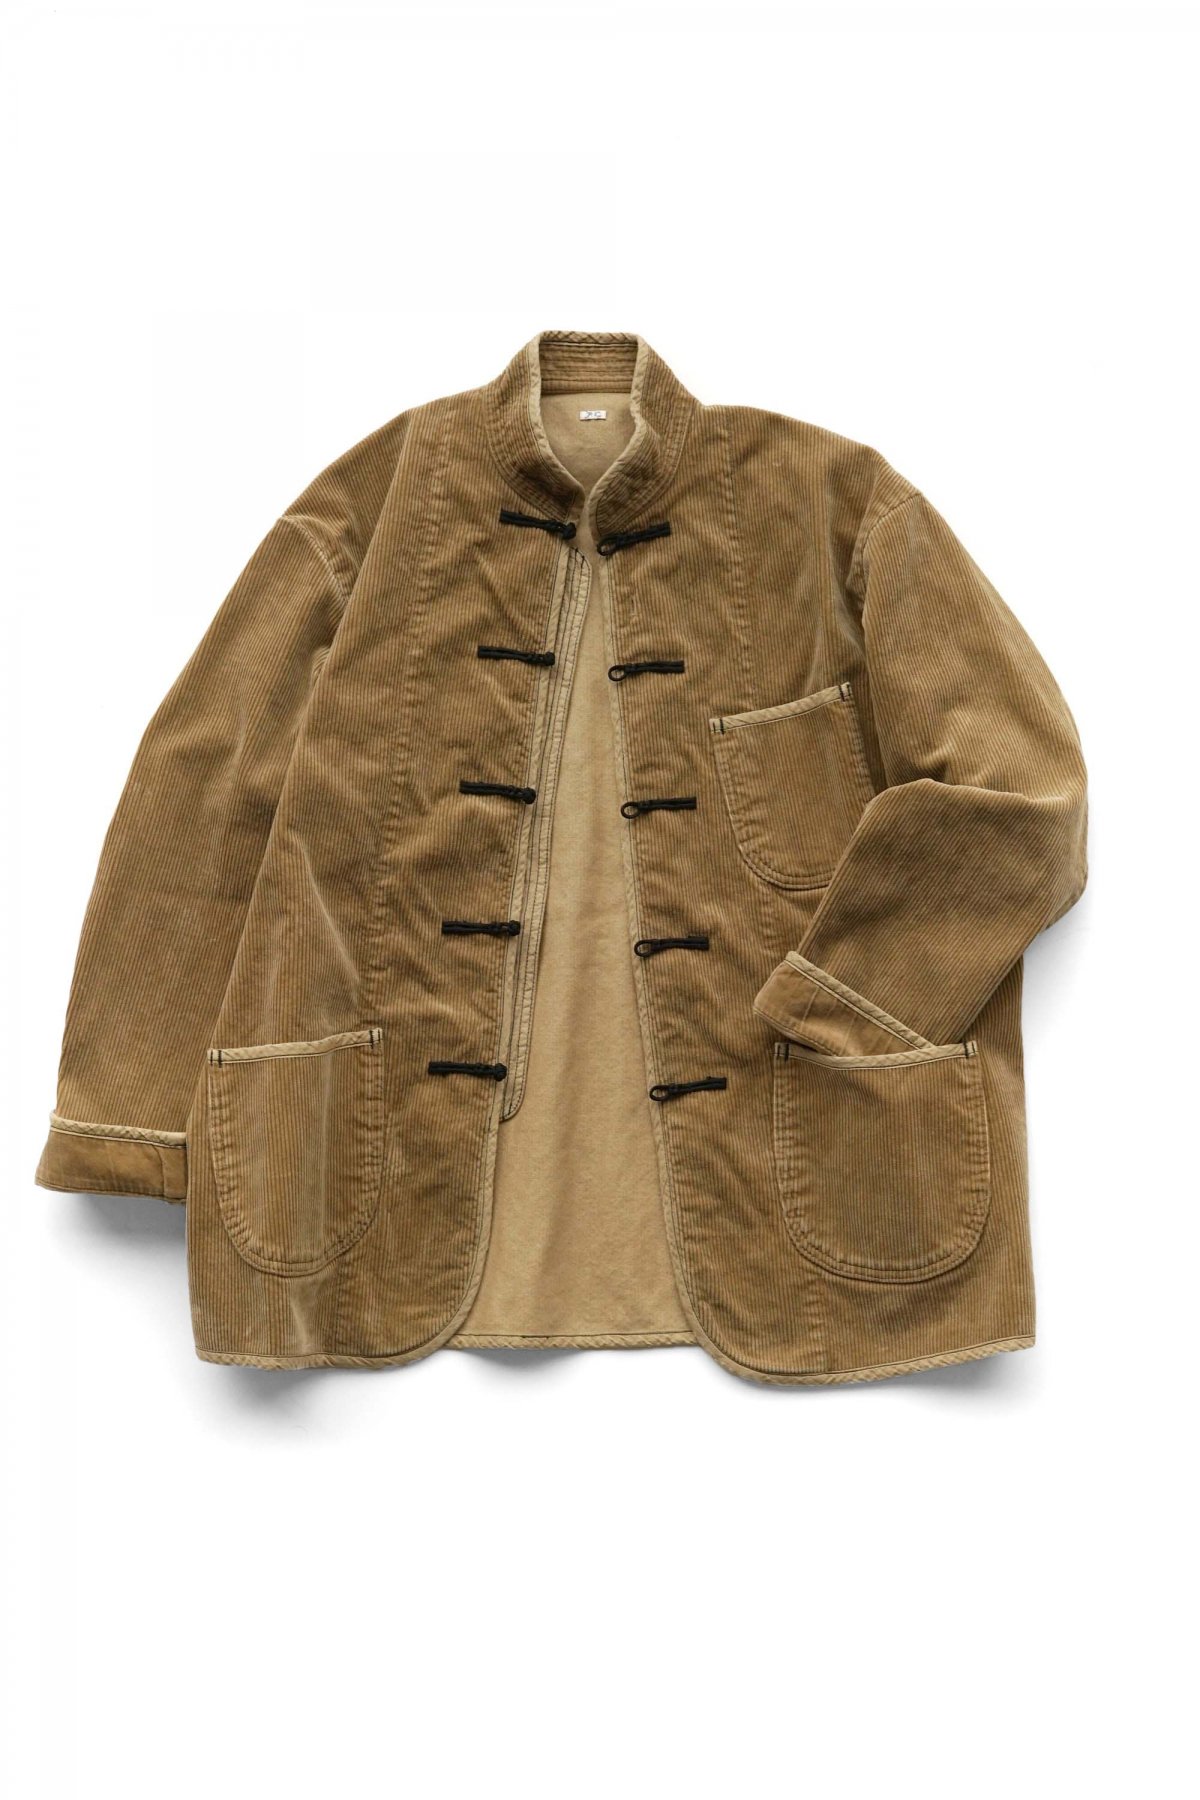 Porter Classic - CORDUROY CHINESE JACKET - WATCH CHAIN ITEM ...